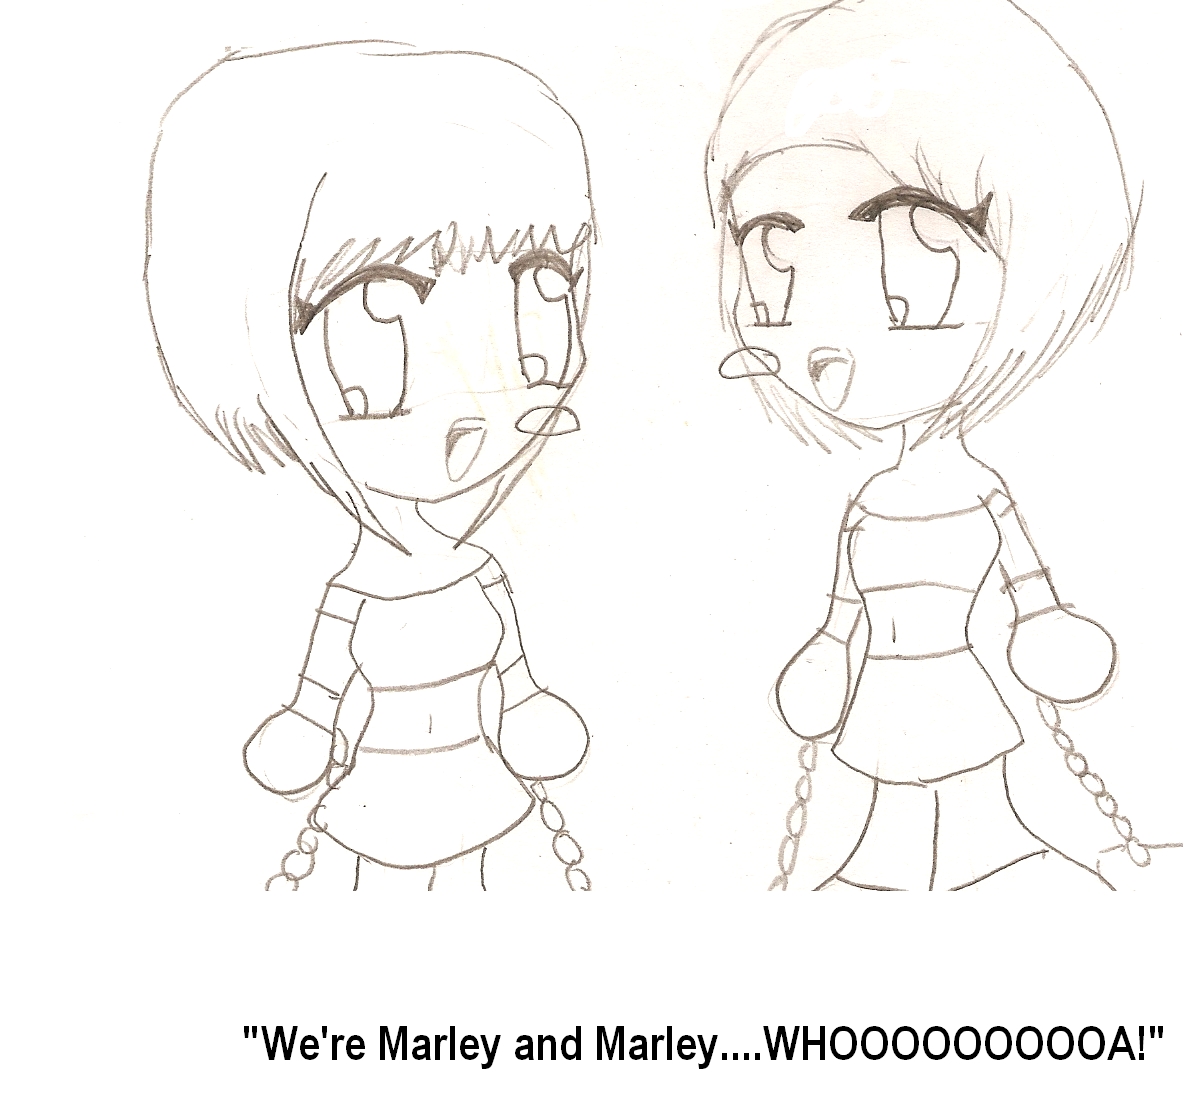 We're Marley and Marley! by animeguys4me